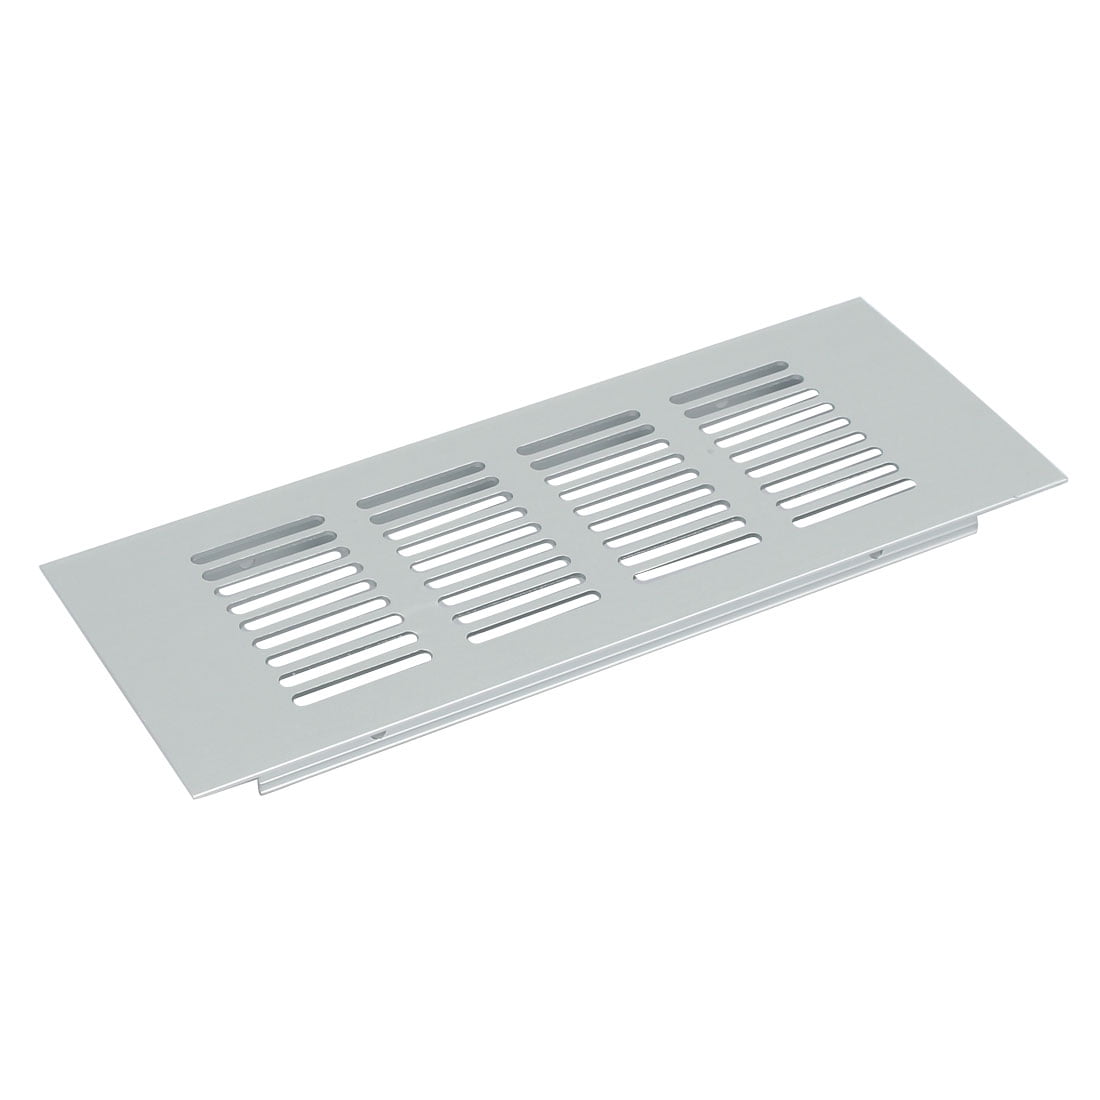 300x100mm 12x4 inch Black Metal Ventilation Grille Air Vent Cover with Insect Mesh